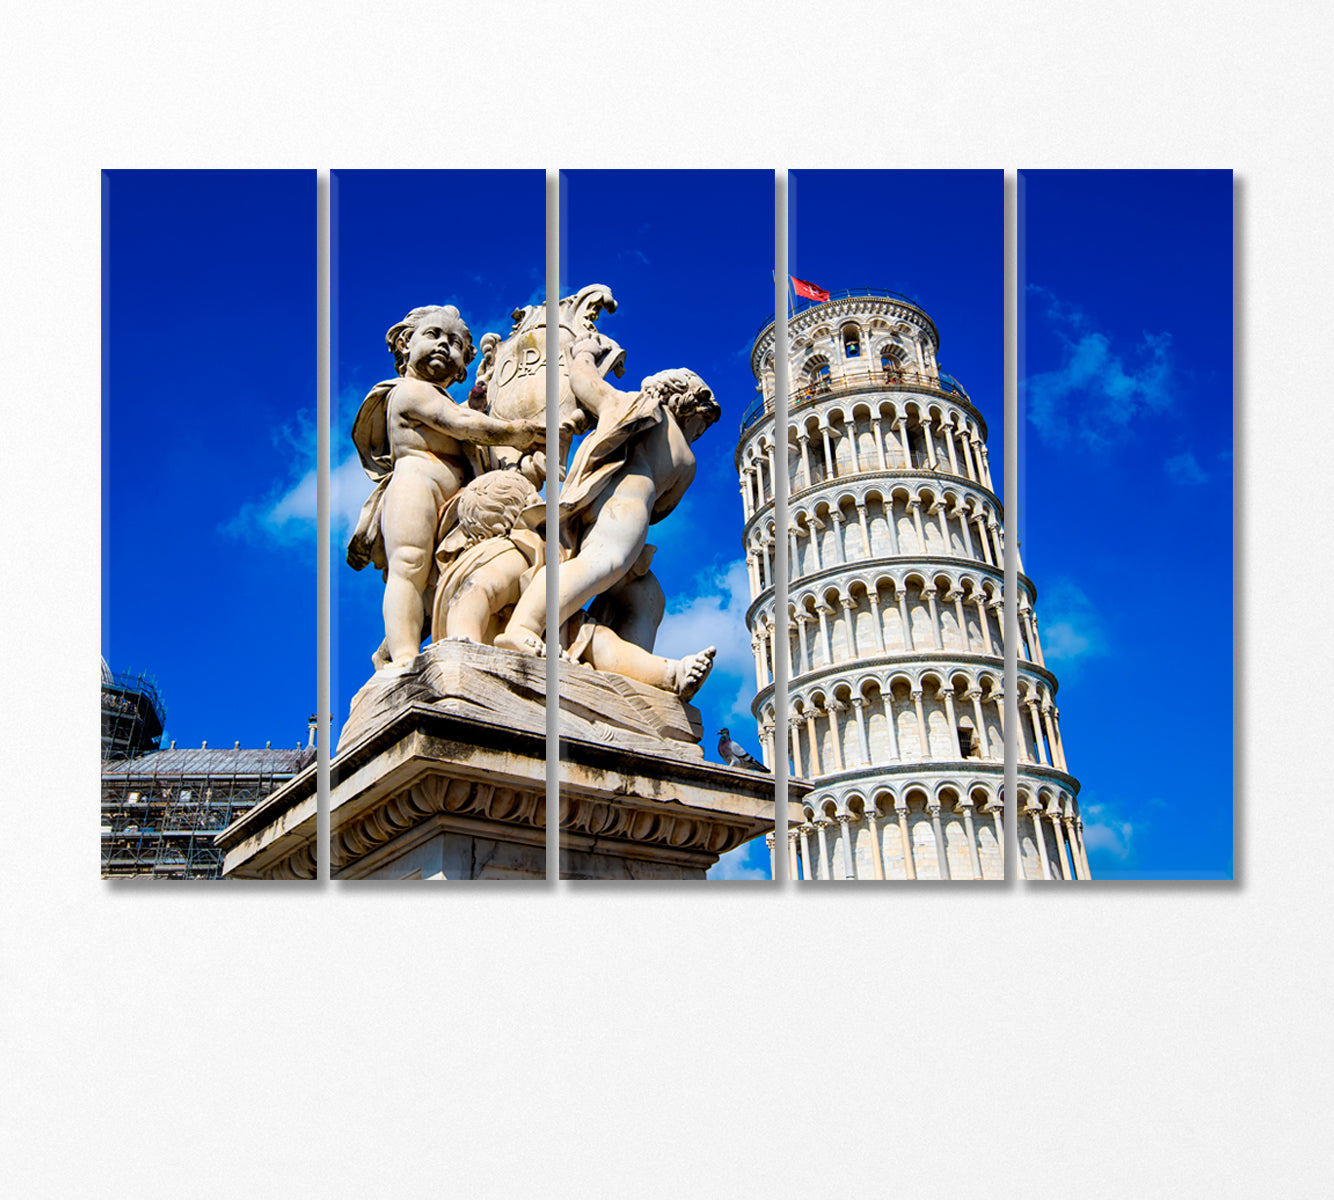 Fontana Dei Putti and Leaning Tower of Pisa Italy Canvas Print-Canvas Print-CetArt-5 Panels-36x24 inches-CetArt